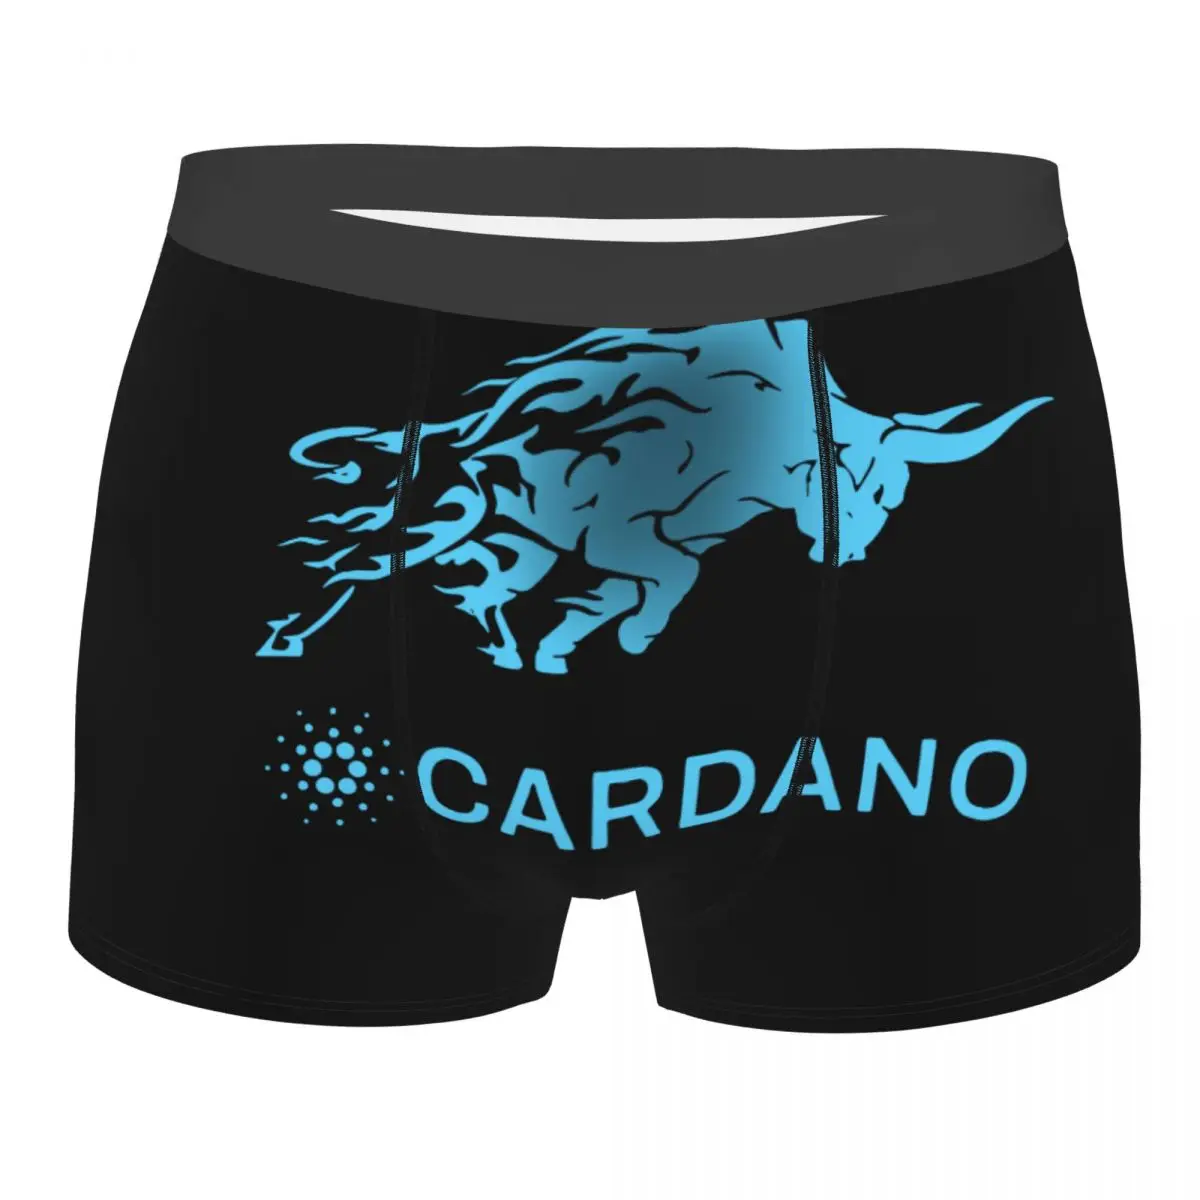 

Men Cardano Boxer Shorts Panties Mid Waist Underwear Hodl ADA Crypto Coin Cryptocurrency Male Funny Underpants